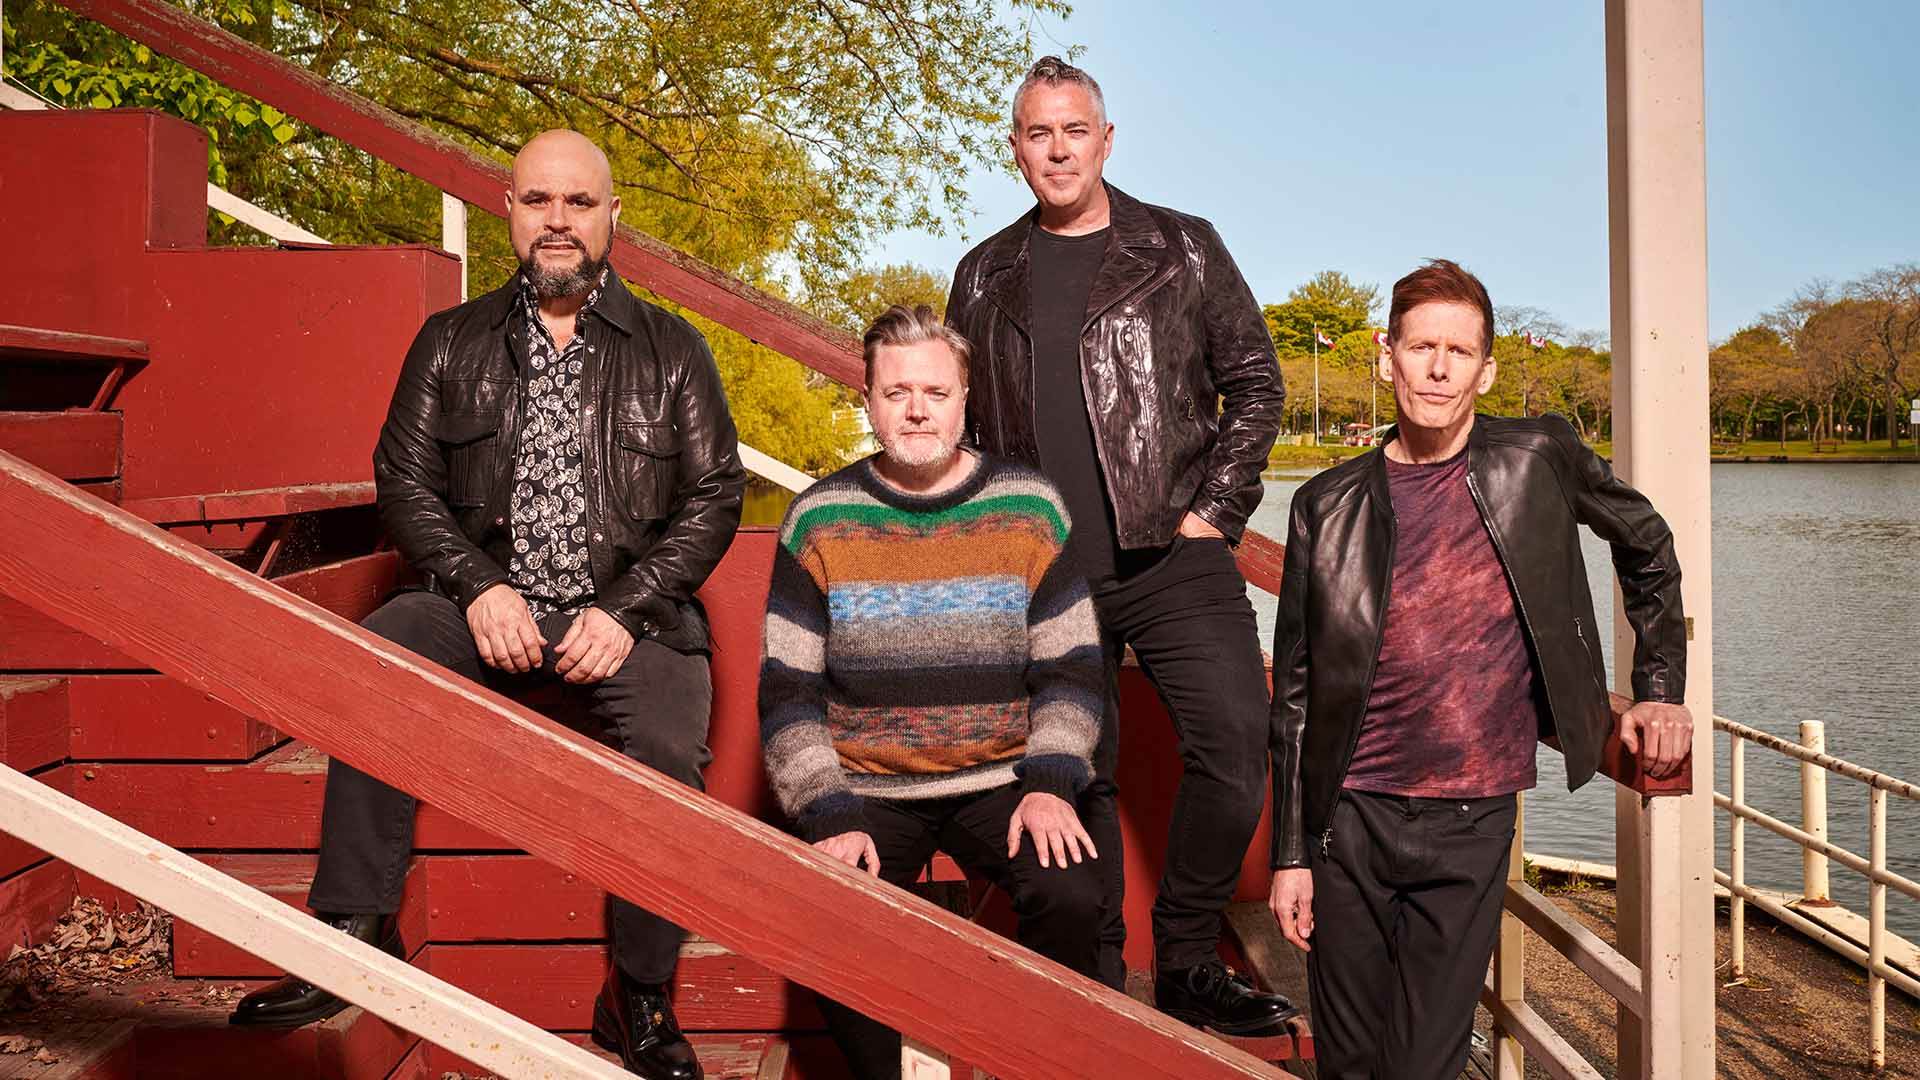 Barenaked Ladies band - four middle-aged men sitting and leaning against red wooden bleachers that overlook a lake with trees. Three men are wearing black leather jackets and black jeans with dark shirts. In the center, a man with graying short hair wearing a black, brown and green striped sweater.